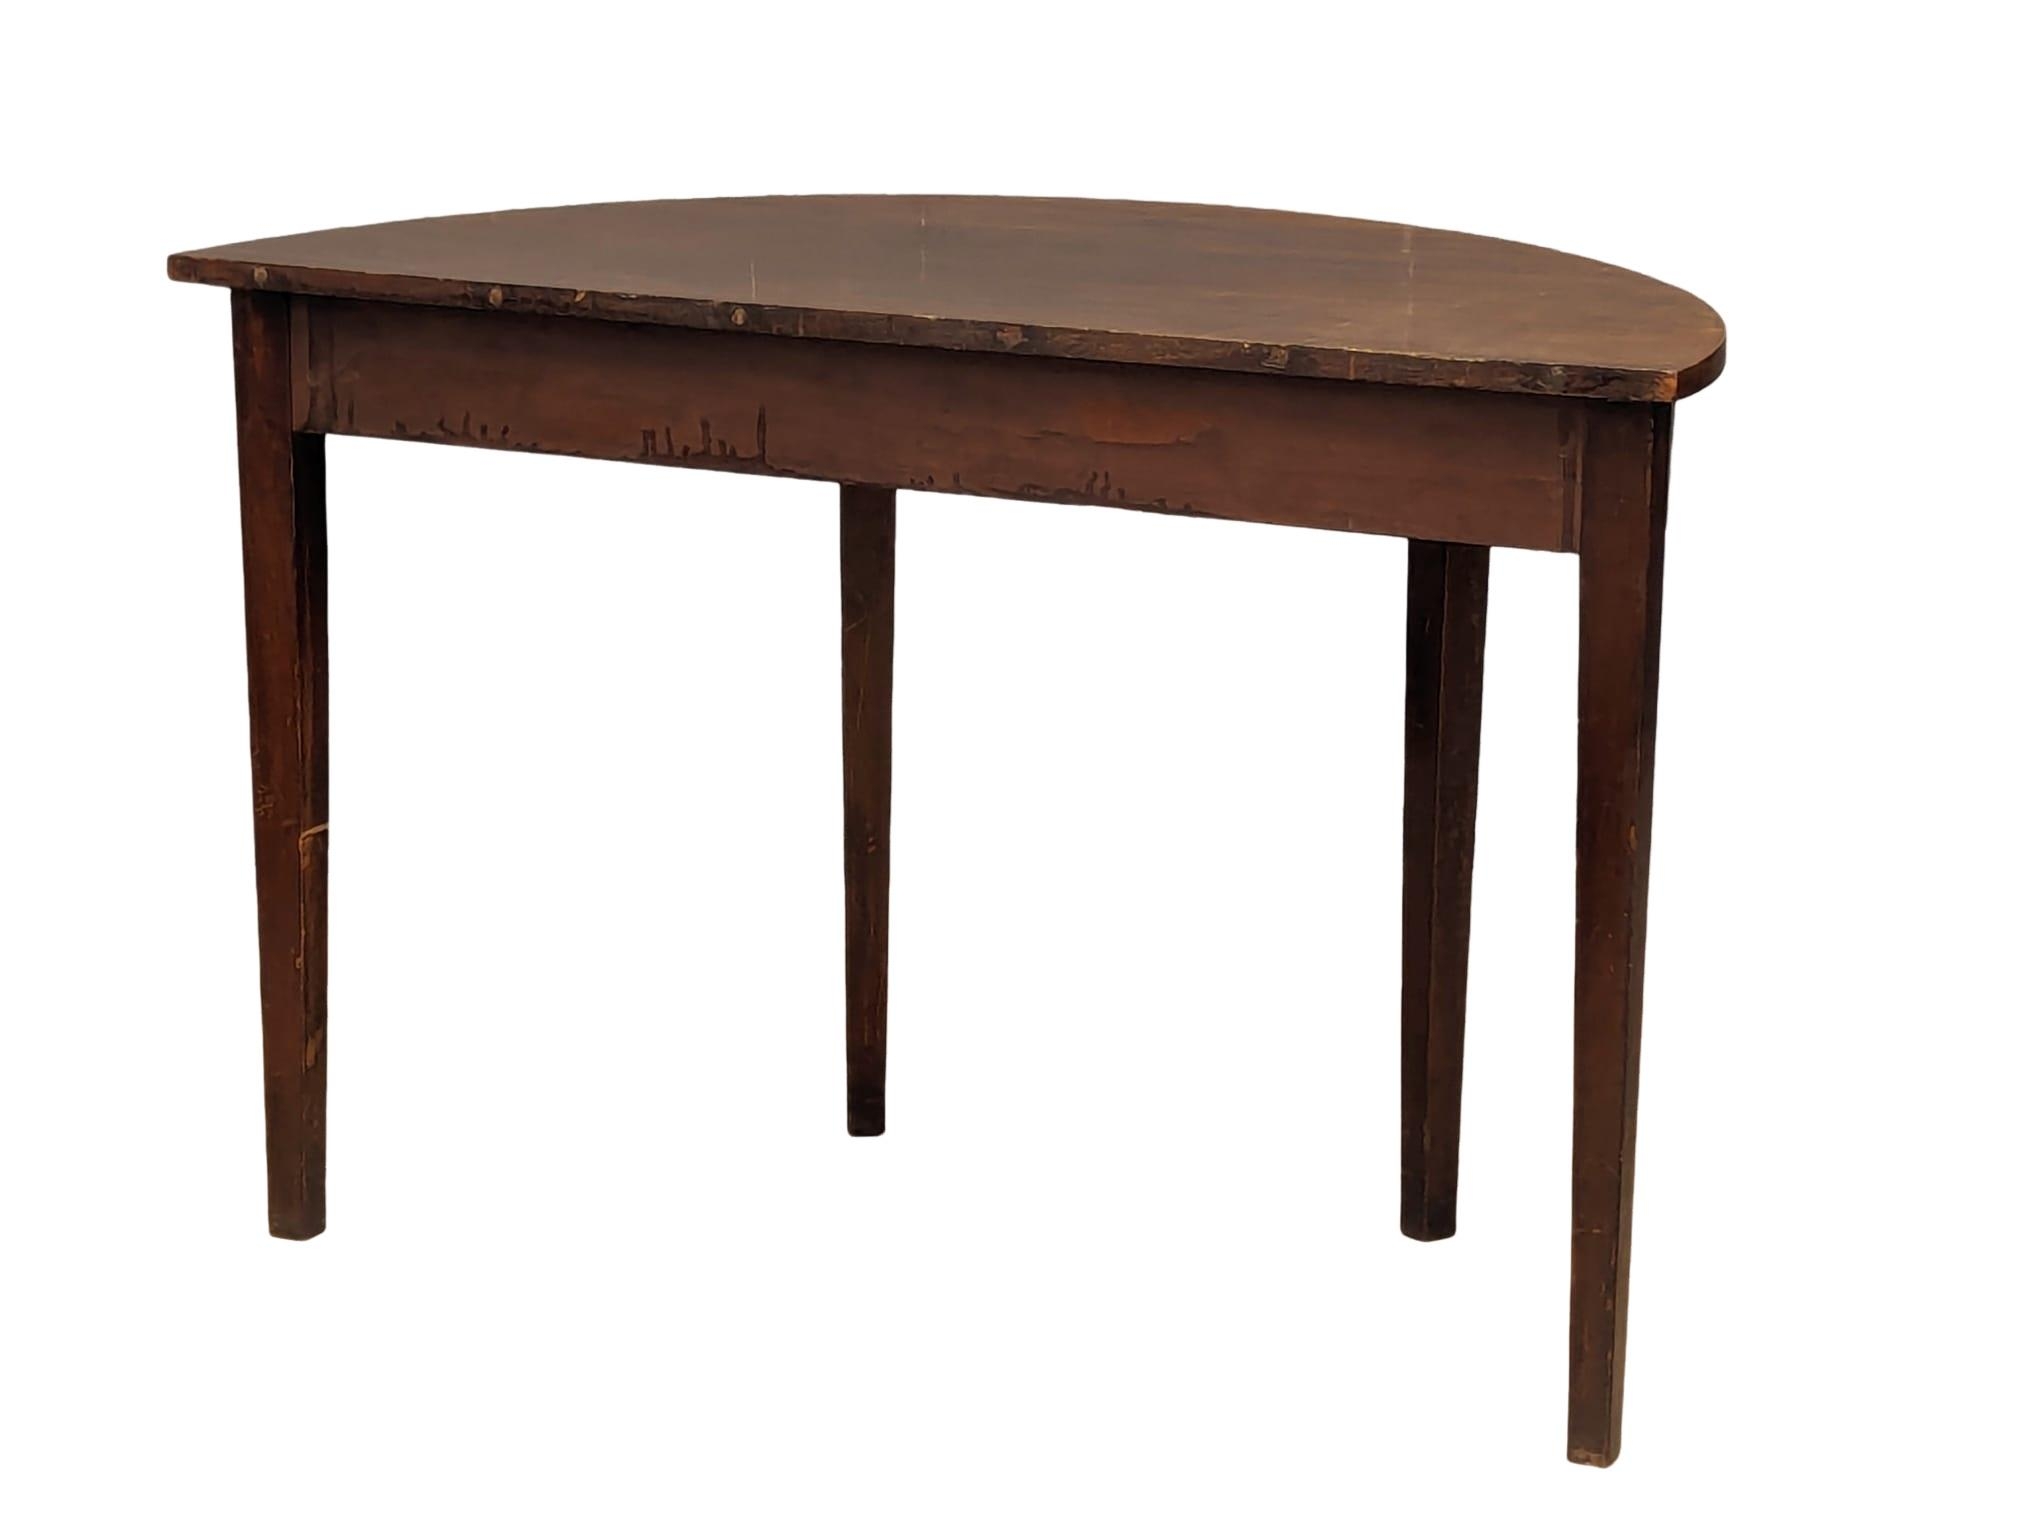 An early 20th Century mahogany hall table in the Georgian style, 109cm x 54cm x 71.5cm - Image 3 of 4